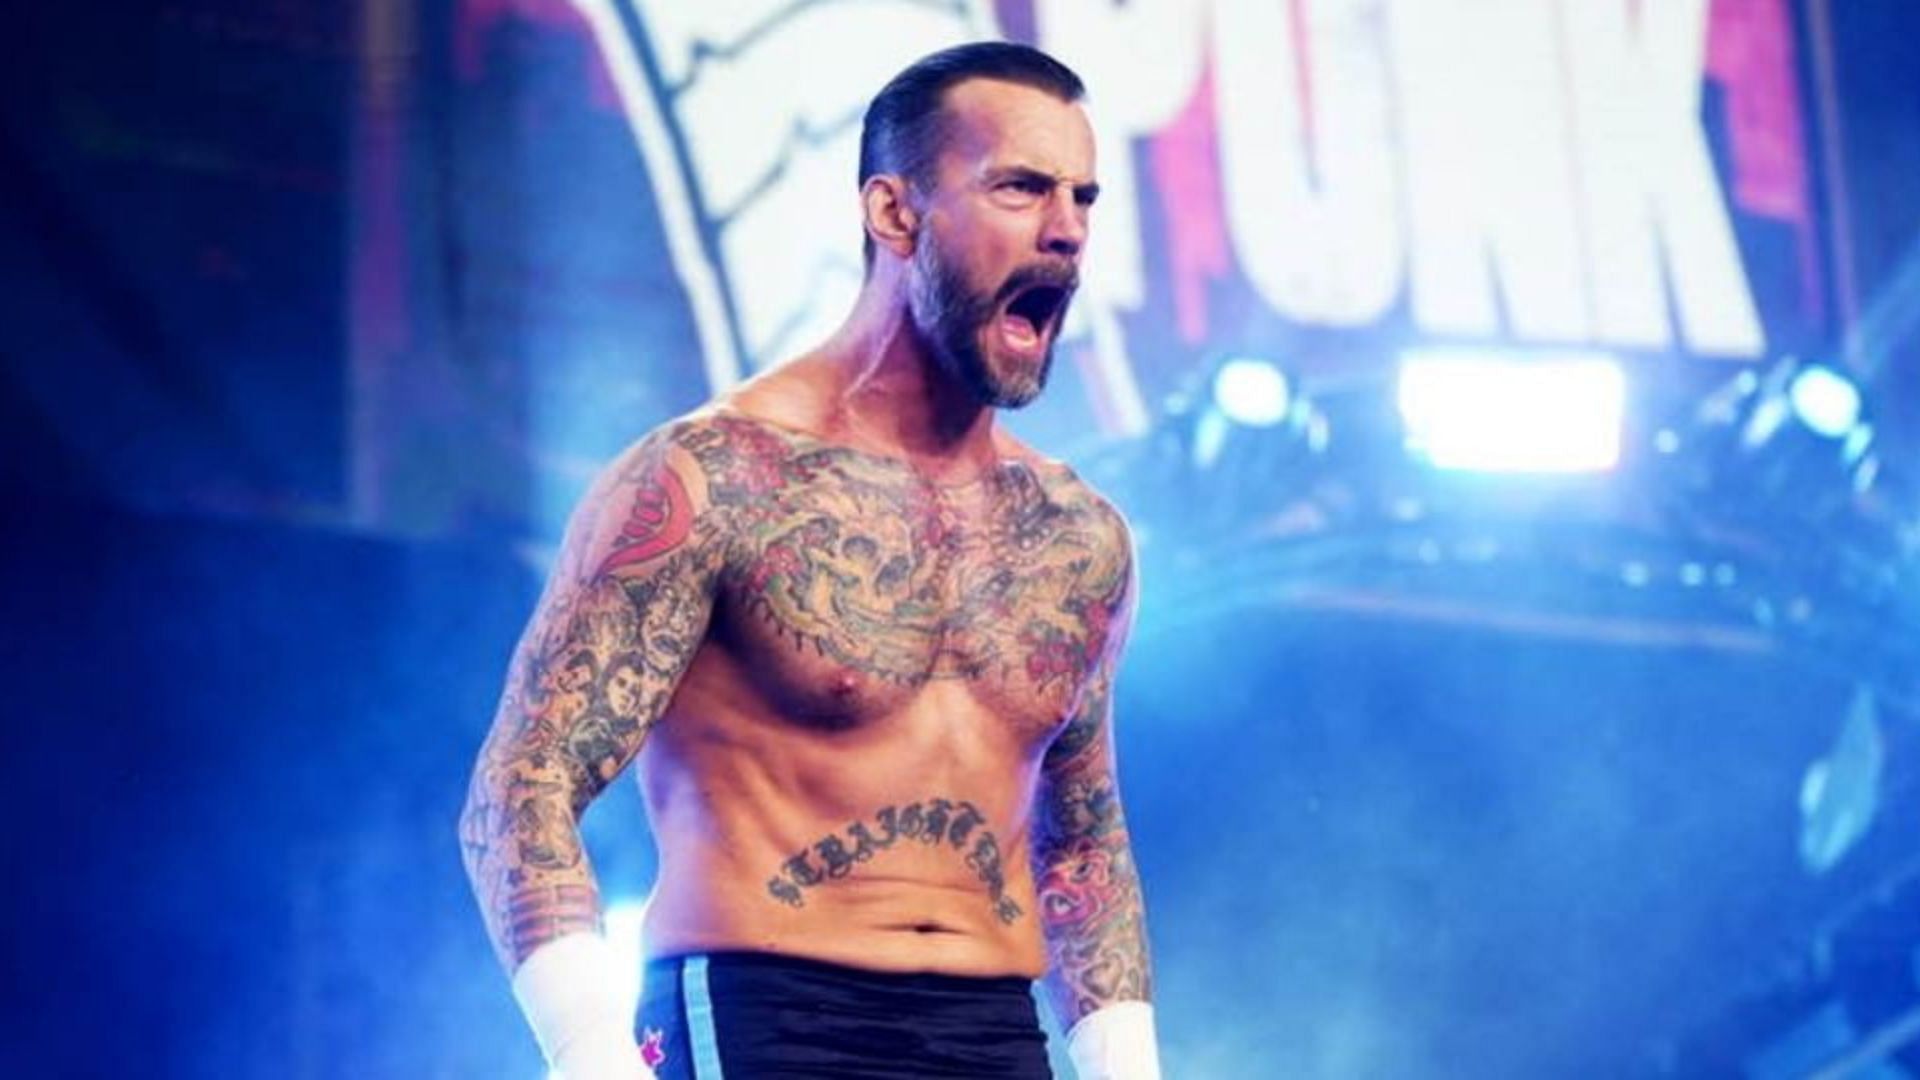 CM Punk has an appearance scheduled for next month!